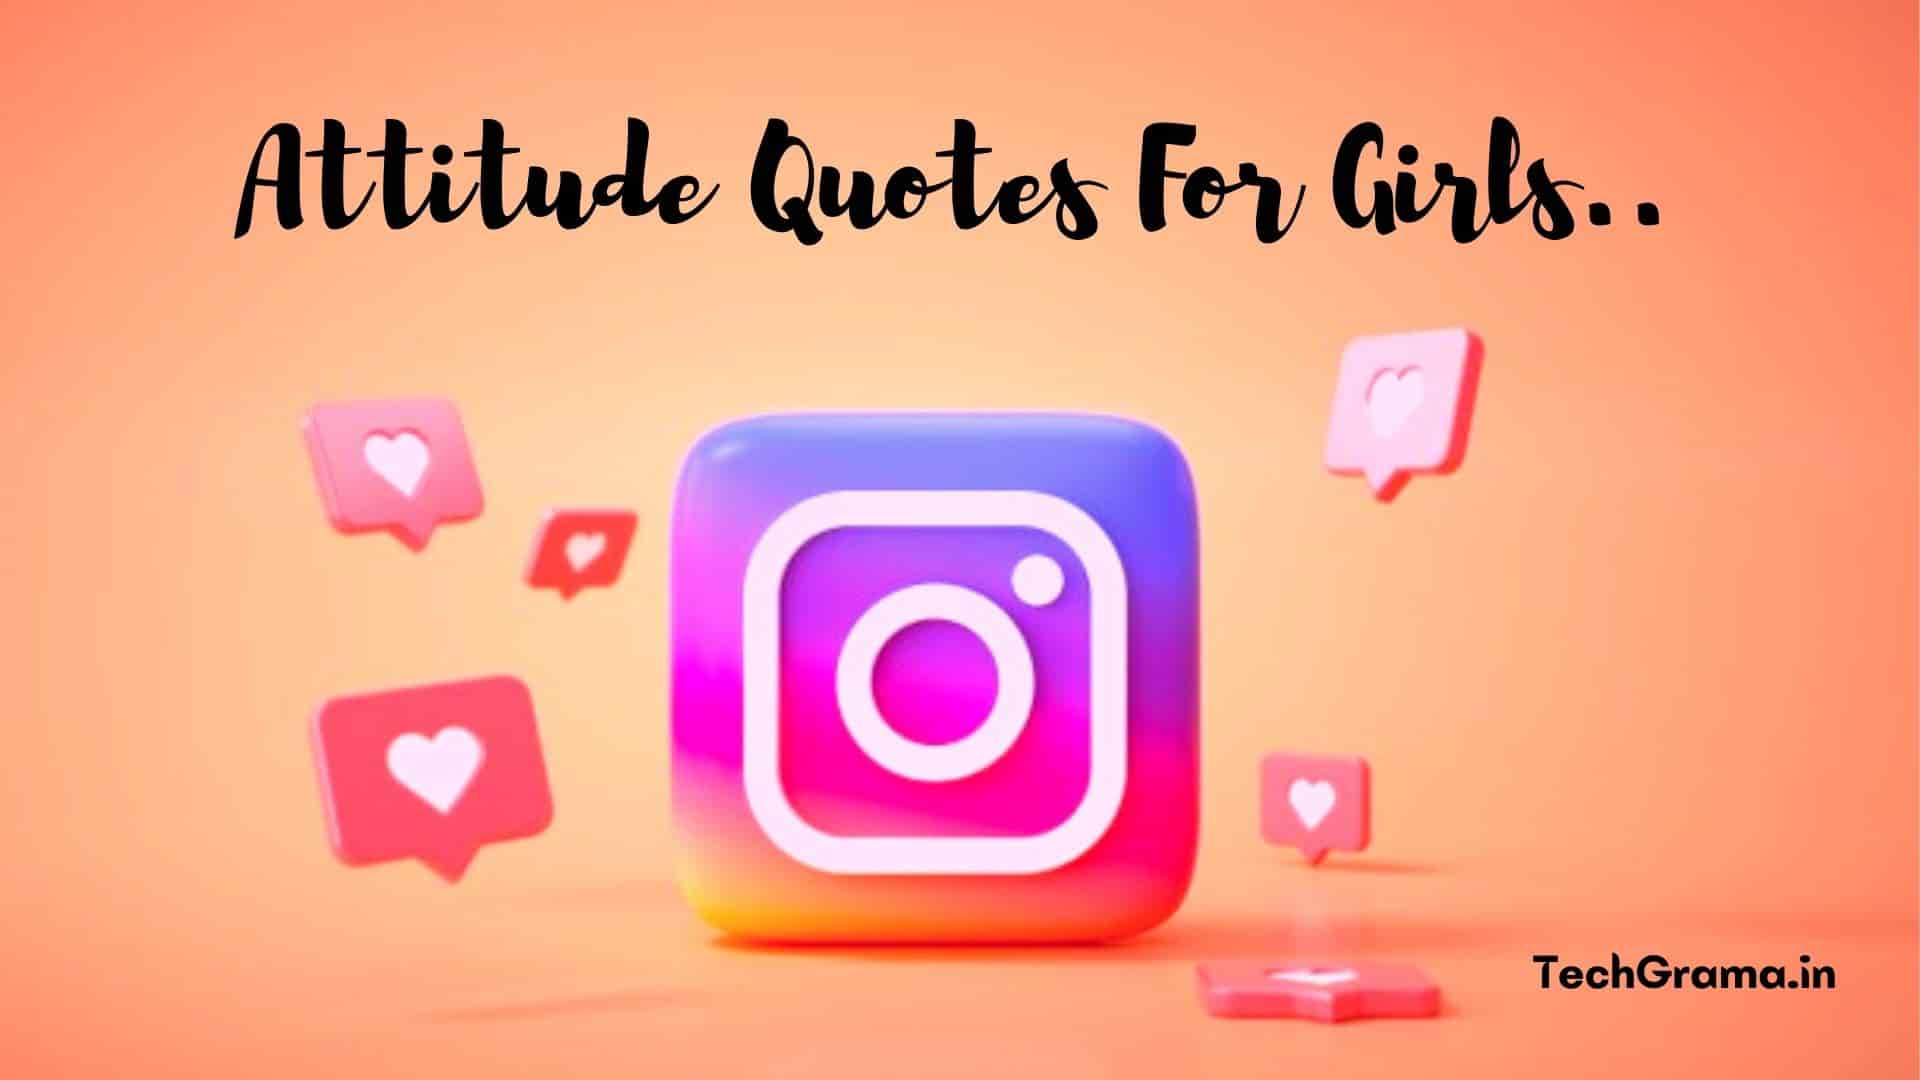 Best Attitude Quotes For Girls For Instagram, Caption For Stylish Girl Attitude, Beauty Girl Attitude Quotes, Savage Girl Attitude Quotes, Best Girl Attitude Quotes, Killer Attitude Quotes For Girls, Attitude Quotes For Girls, Killer Attitude Quotes For Instagram, Attitude Quotes For Girls in English, Single Girl Attitude Quotes, Short Attitude Quotes For Girls.